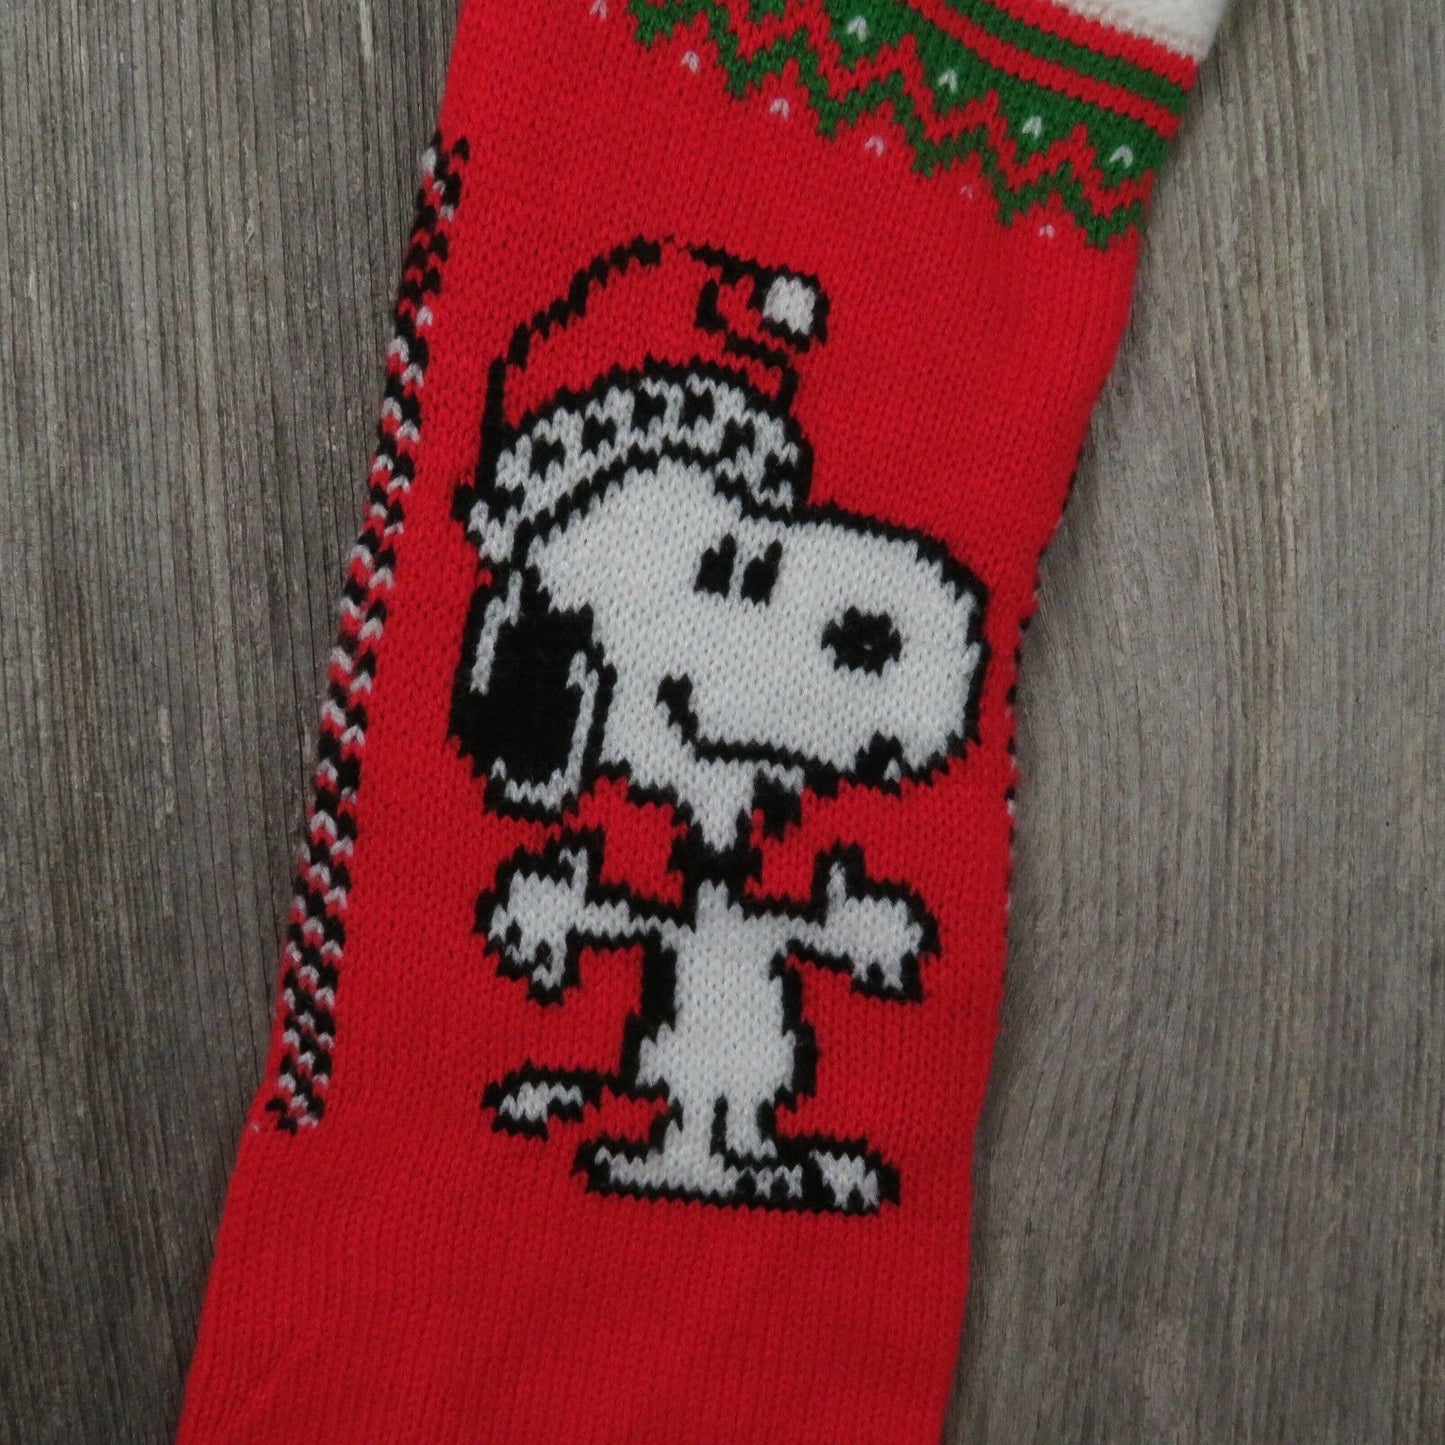 Vintage Snoopy Christmas Stocking Hallmark Knitted Knit Red 1958 Ambassador st27 - At Grandma's Table